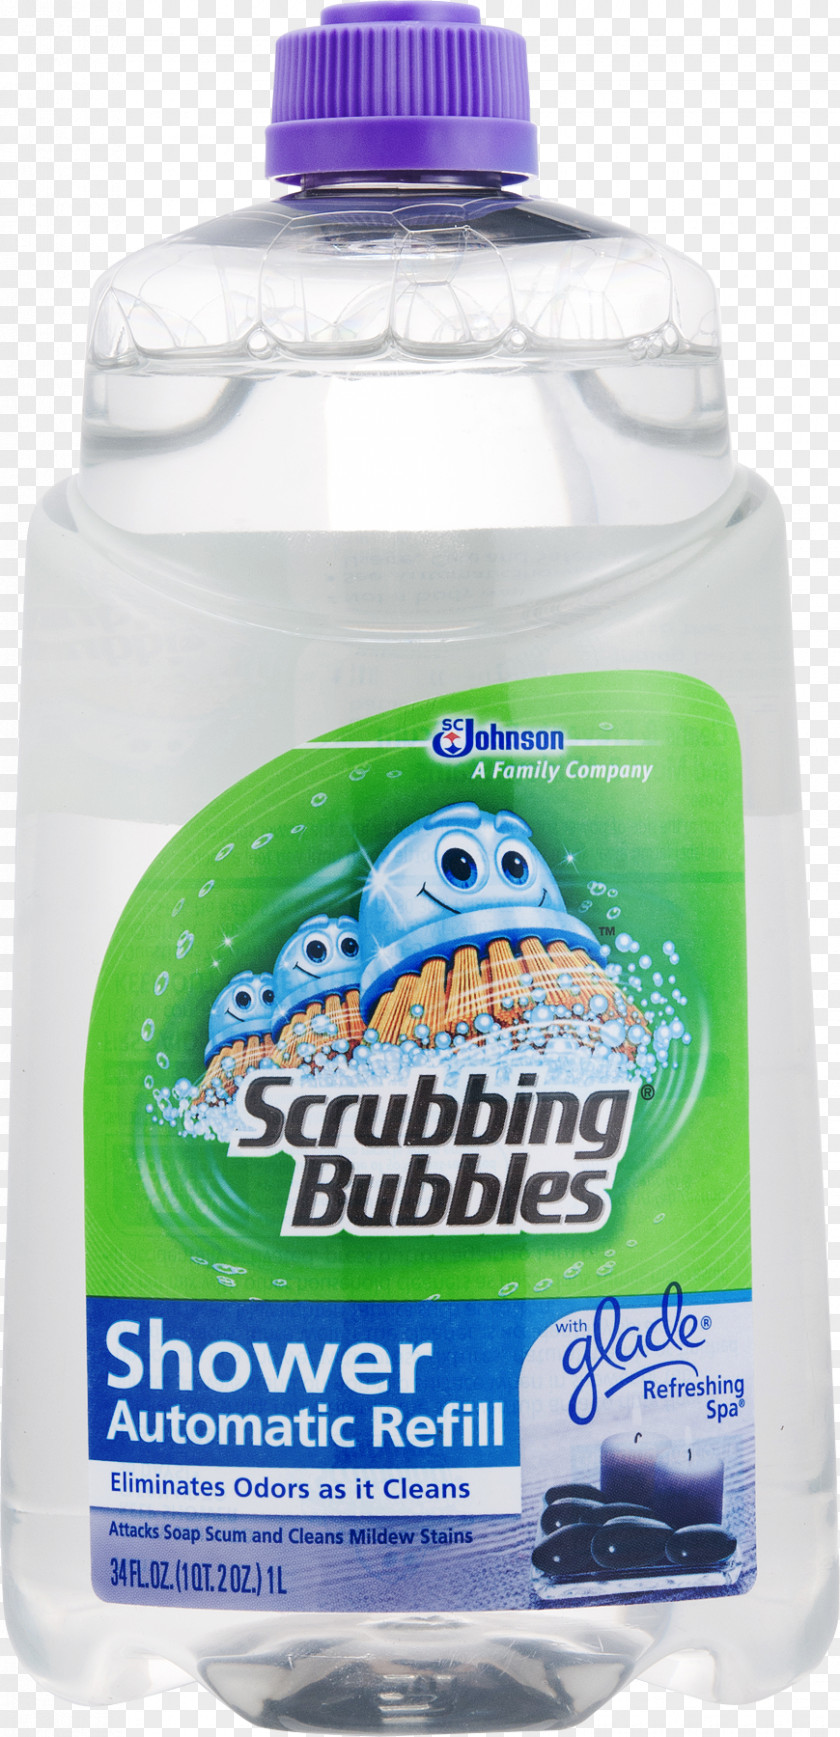 Toilet Scrubbing Bubbles Shower Cleaner Automatic Cleaning Daily PNG